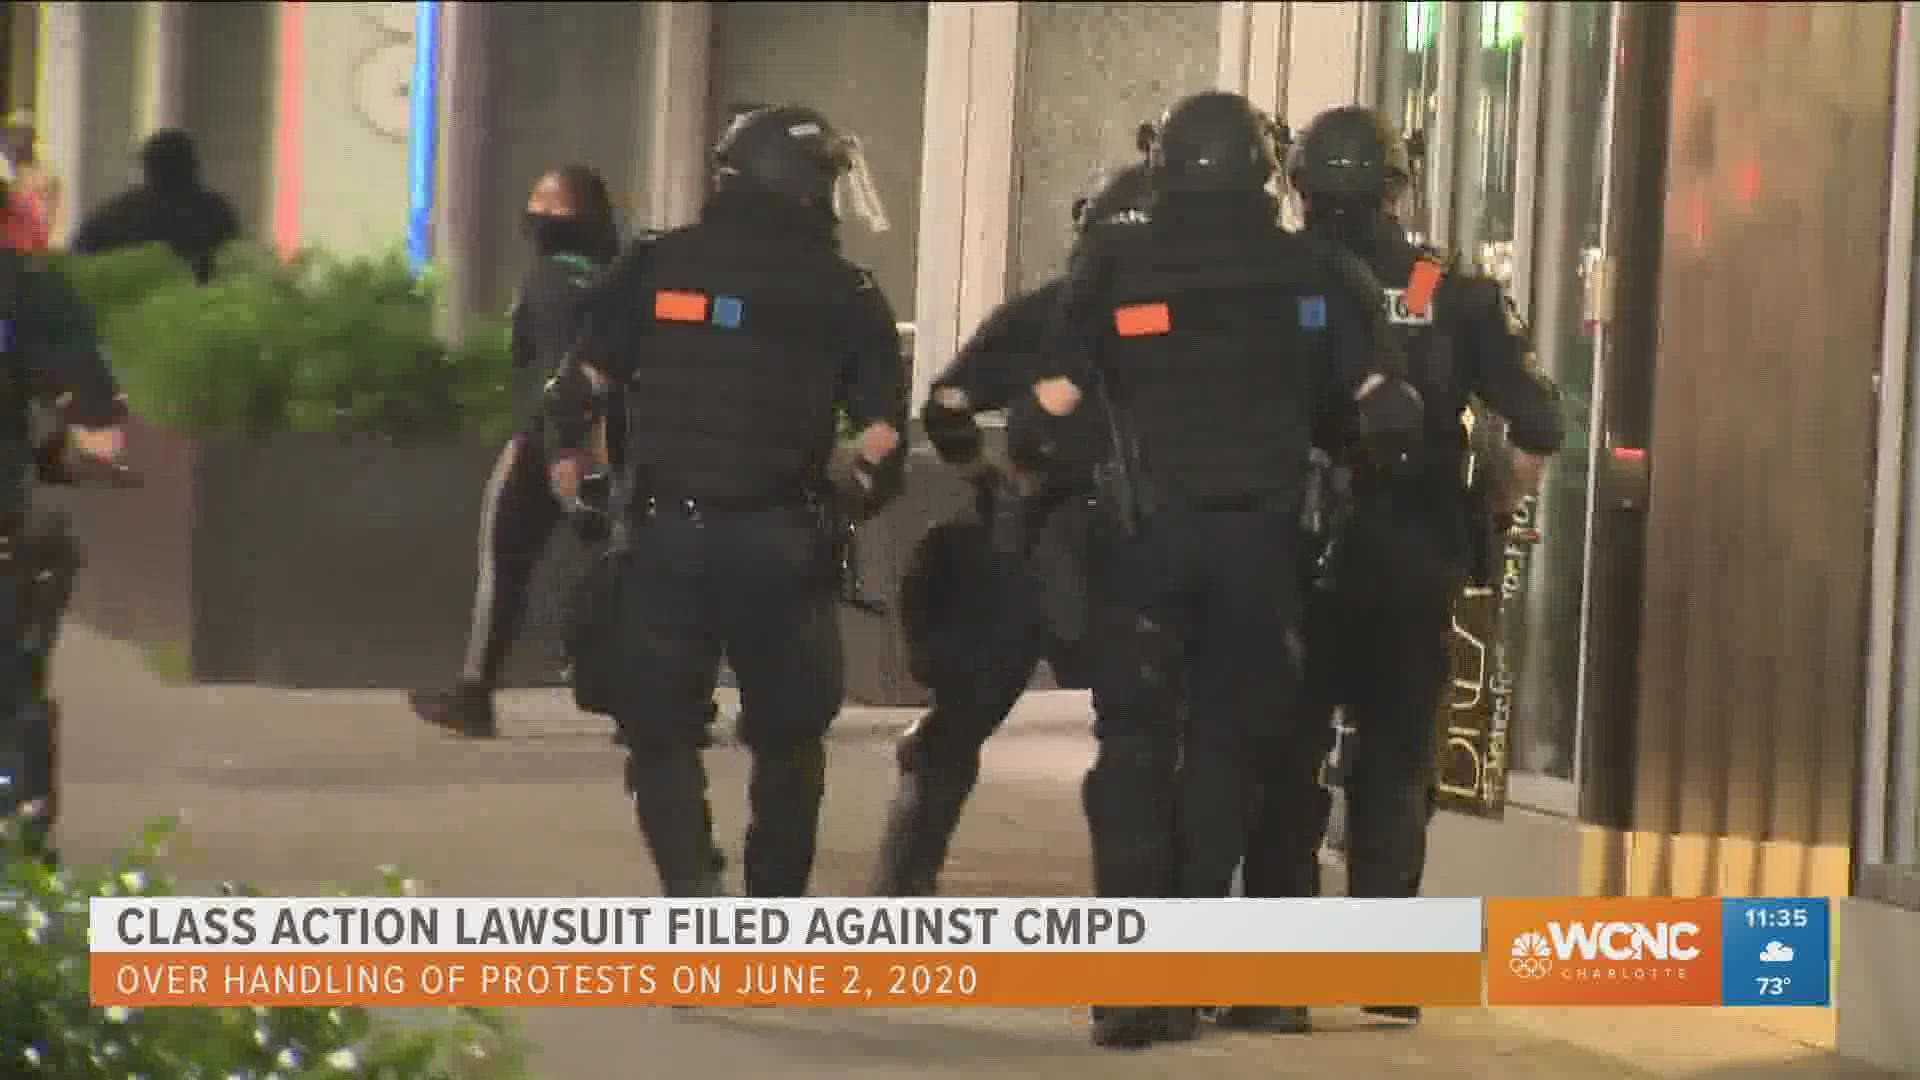 Protesters have filed a lawsuit against Charlotte-Mecklenburg Police Department over their handling of the June 2020 protests.